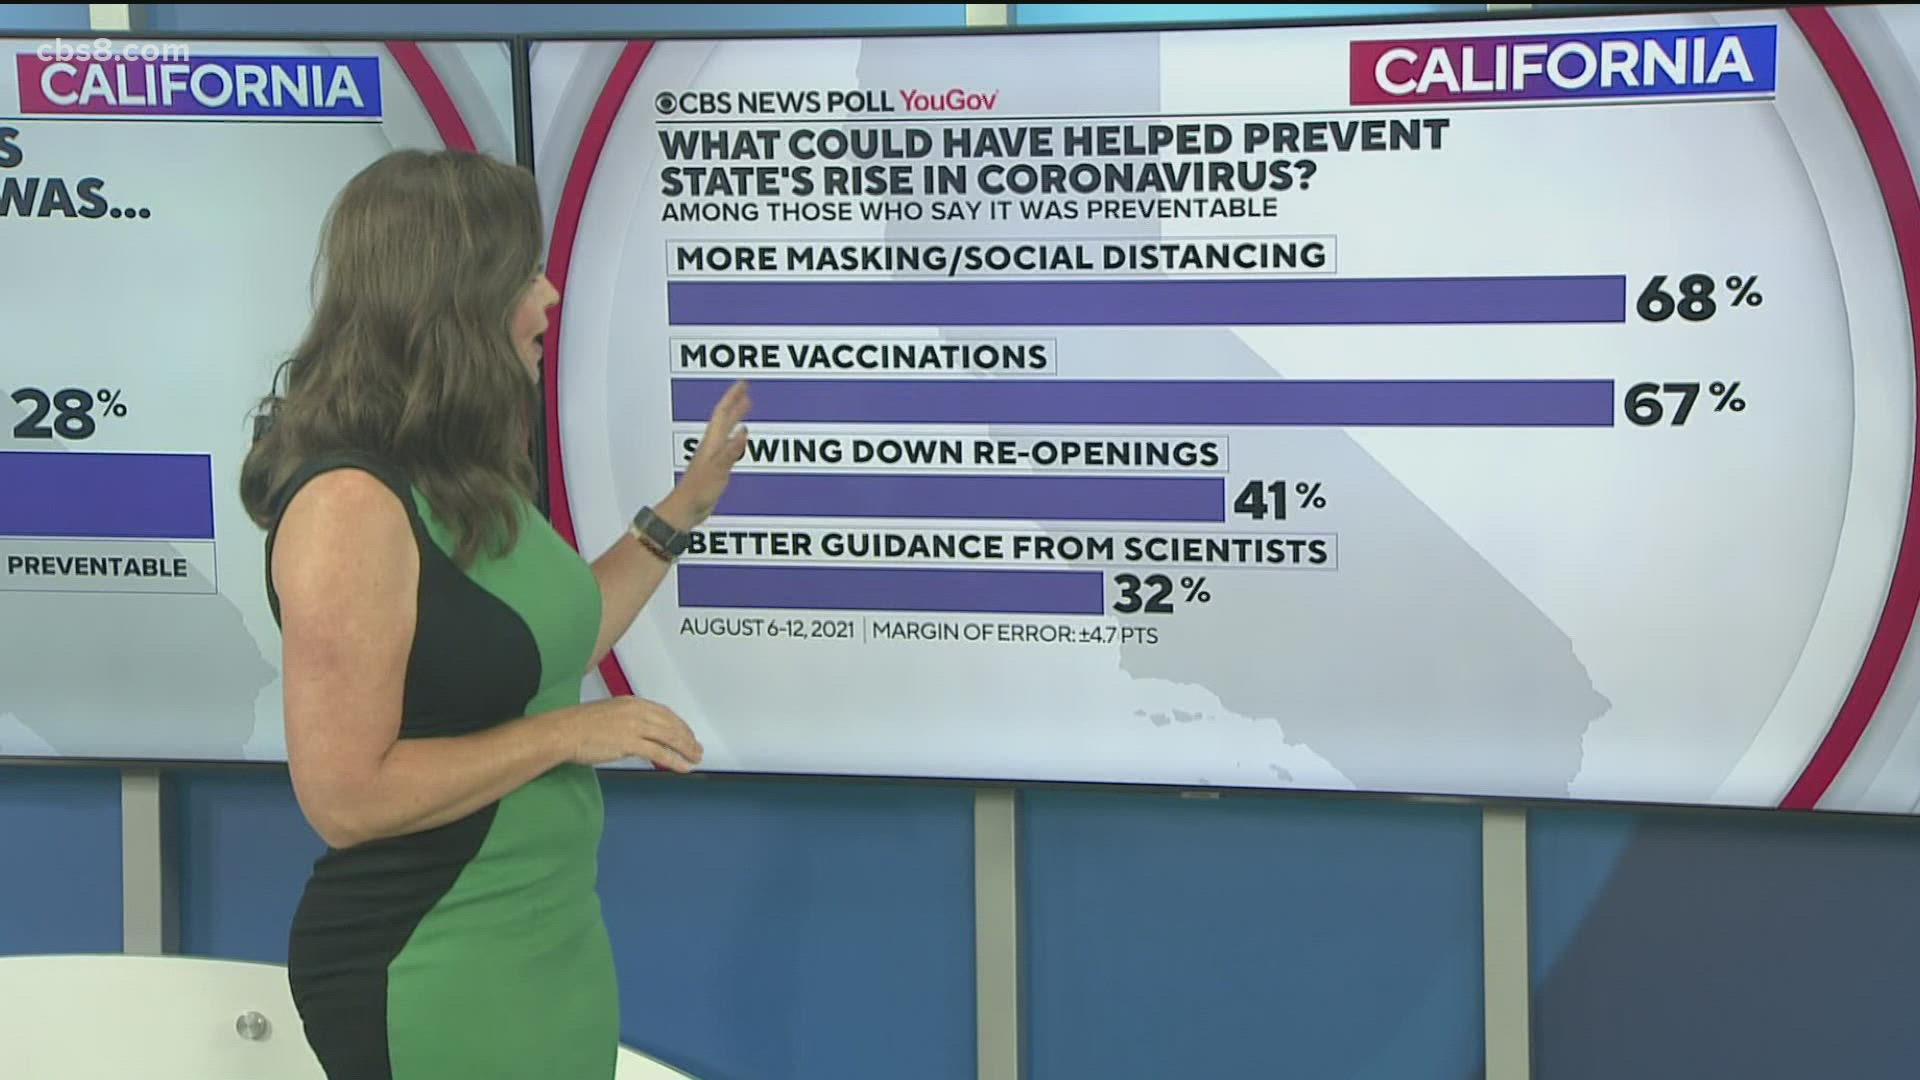 The CBS poll also asked how vaccinated Californians feel about those who are not vaccinated